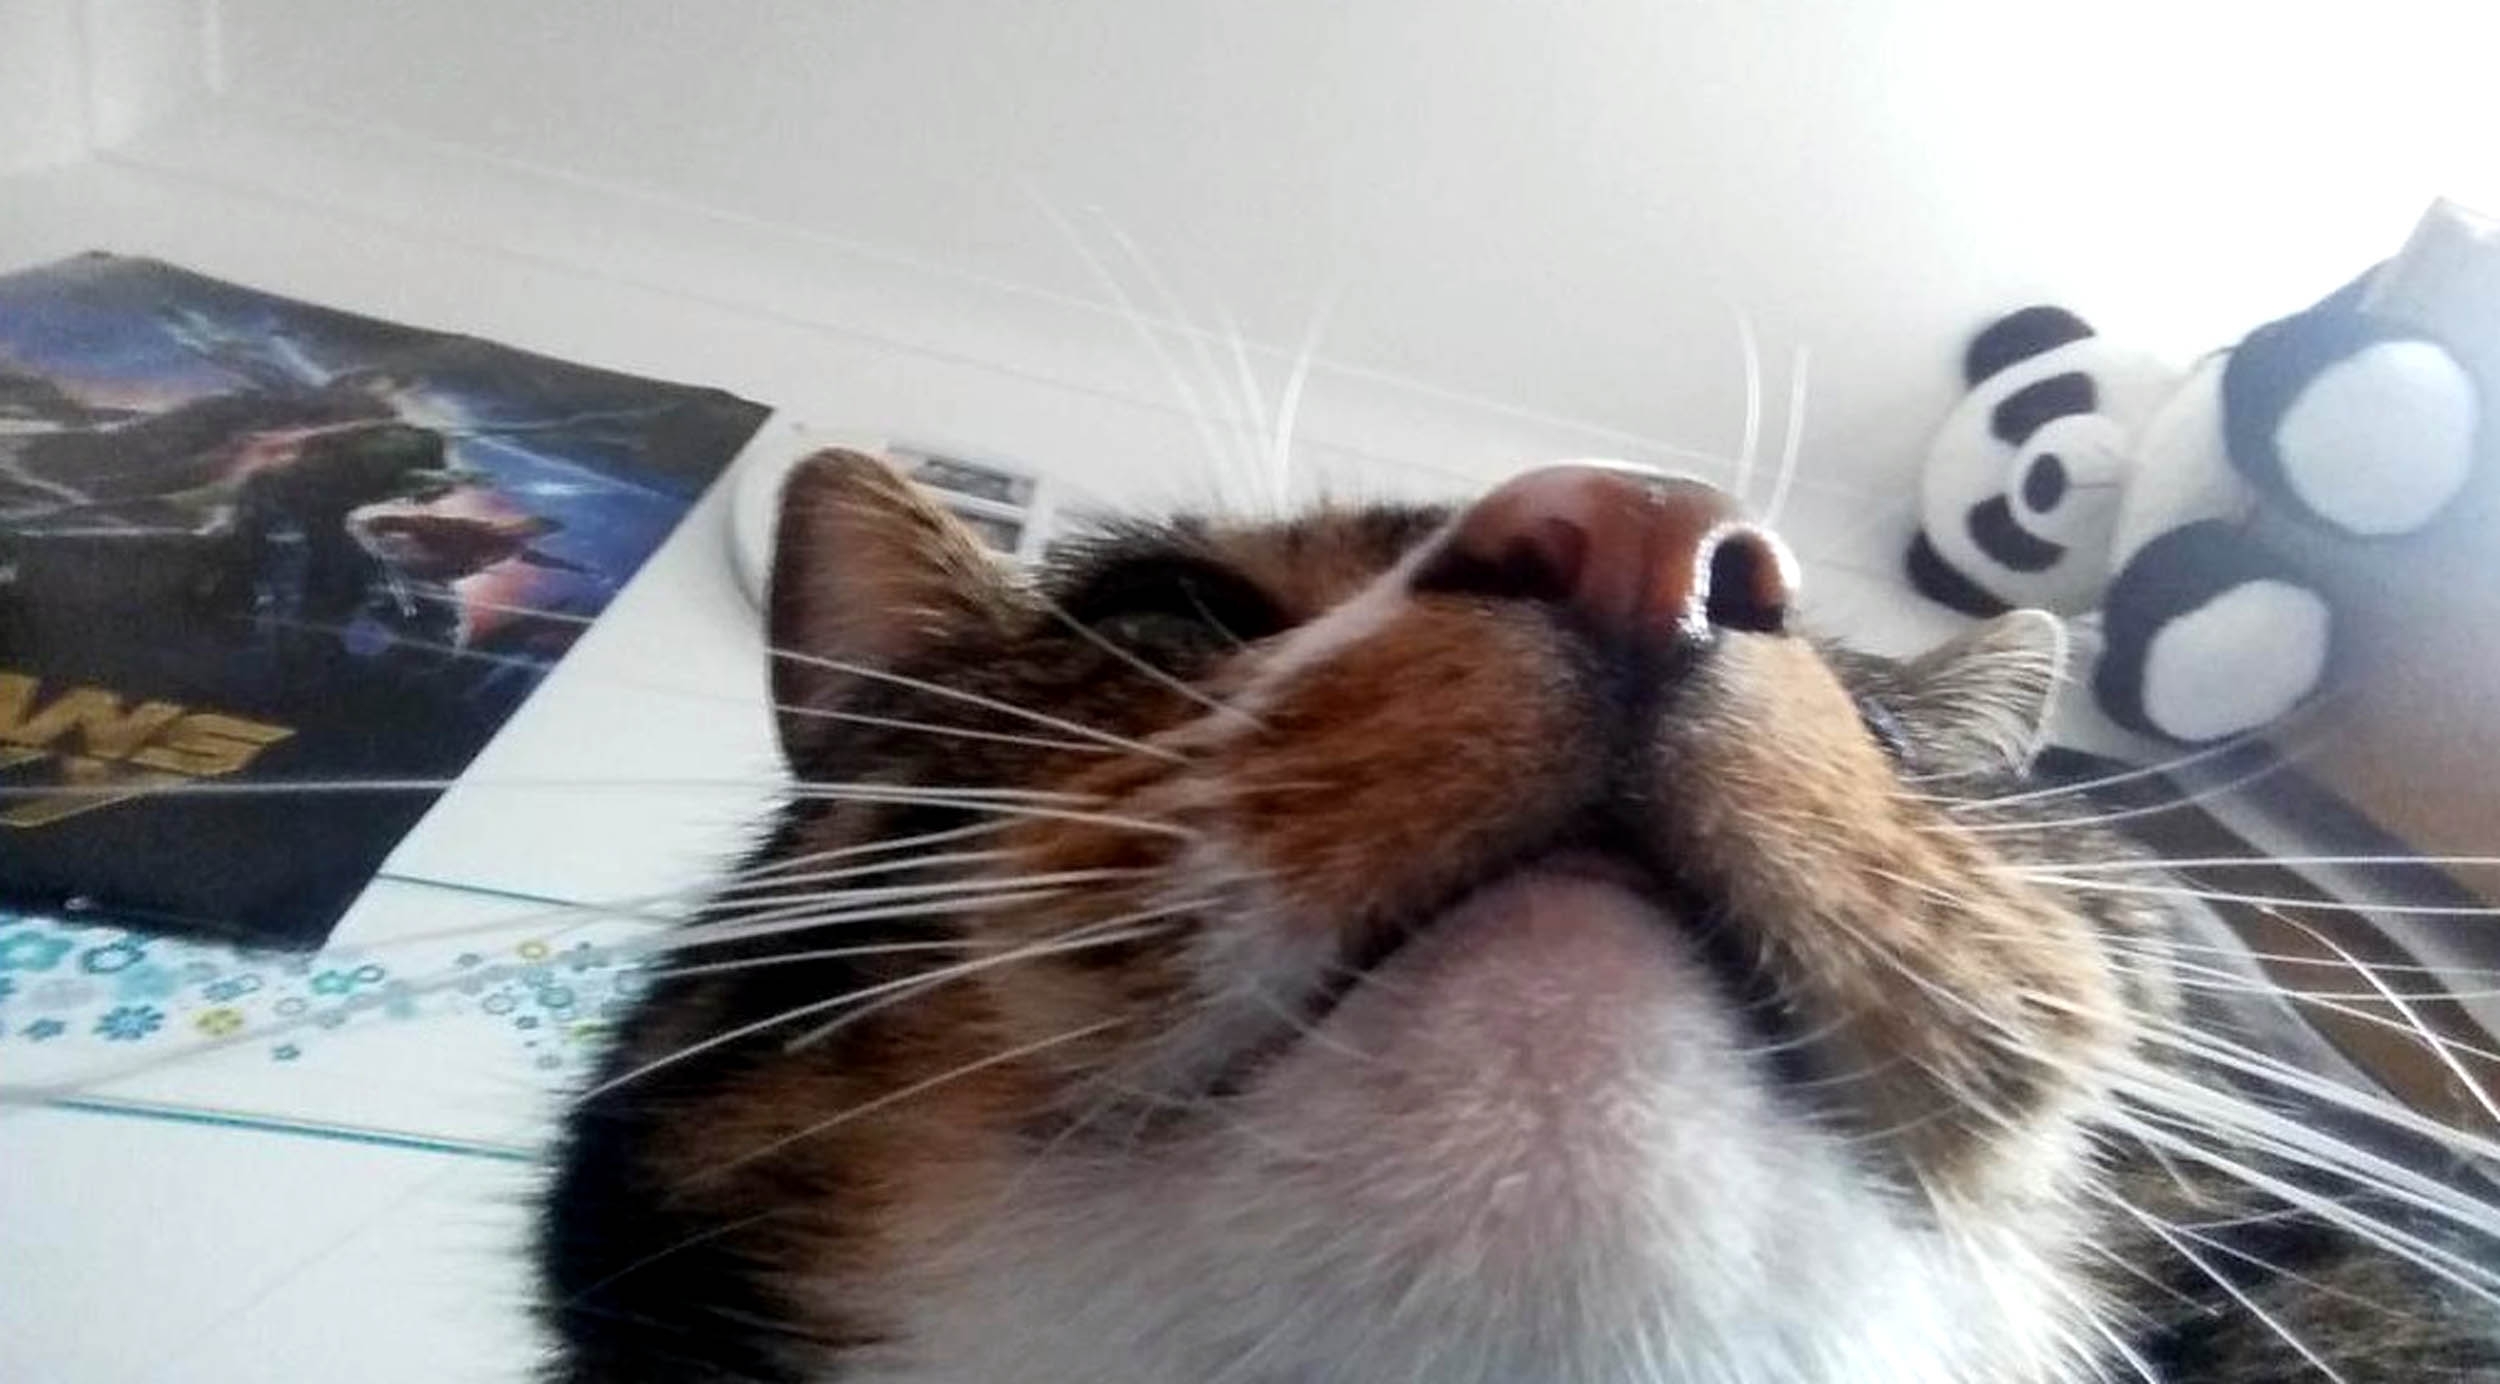 "When your cat accidentally takes a selfie" PETS across the globe are getting in on the selfie phenomenon. Curious cats, dopey dogs and even ham-fisted hamsters are snapping themselves on their owners mobiles - with hilarious results. The pictures, which include a close-up of a one-eyed cat, all were produced when clumsy pets stood on their owners phones or iPads. The results are varied - some pictures show cats looking down into the camera with their chin appearing extremely enlarged, and in others a dogs nose takes up most of the photo.